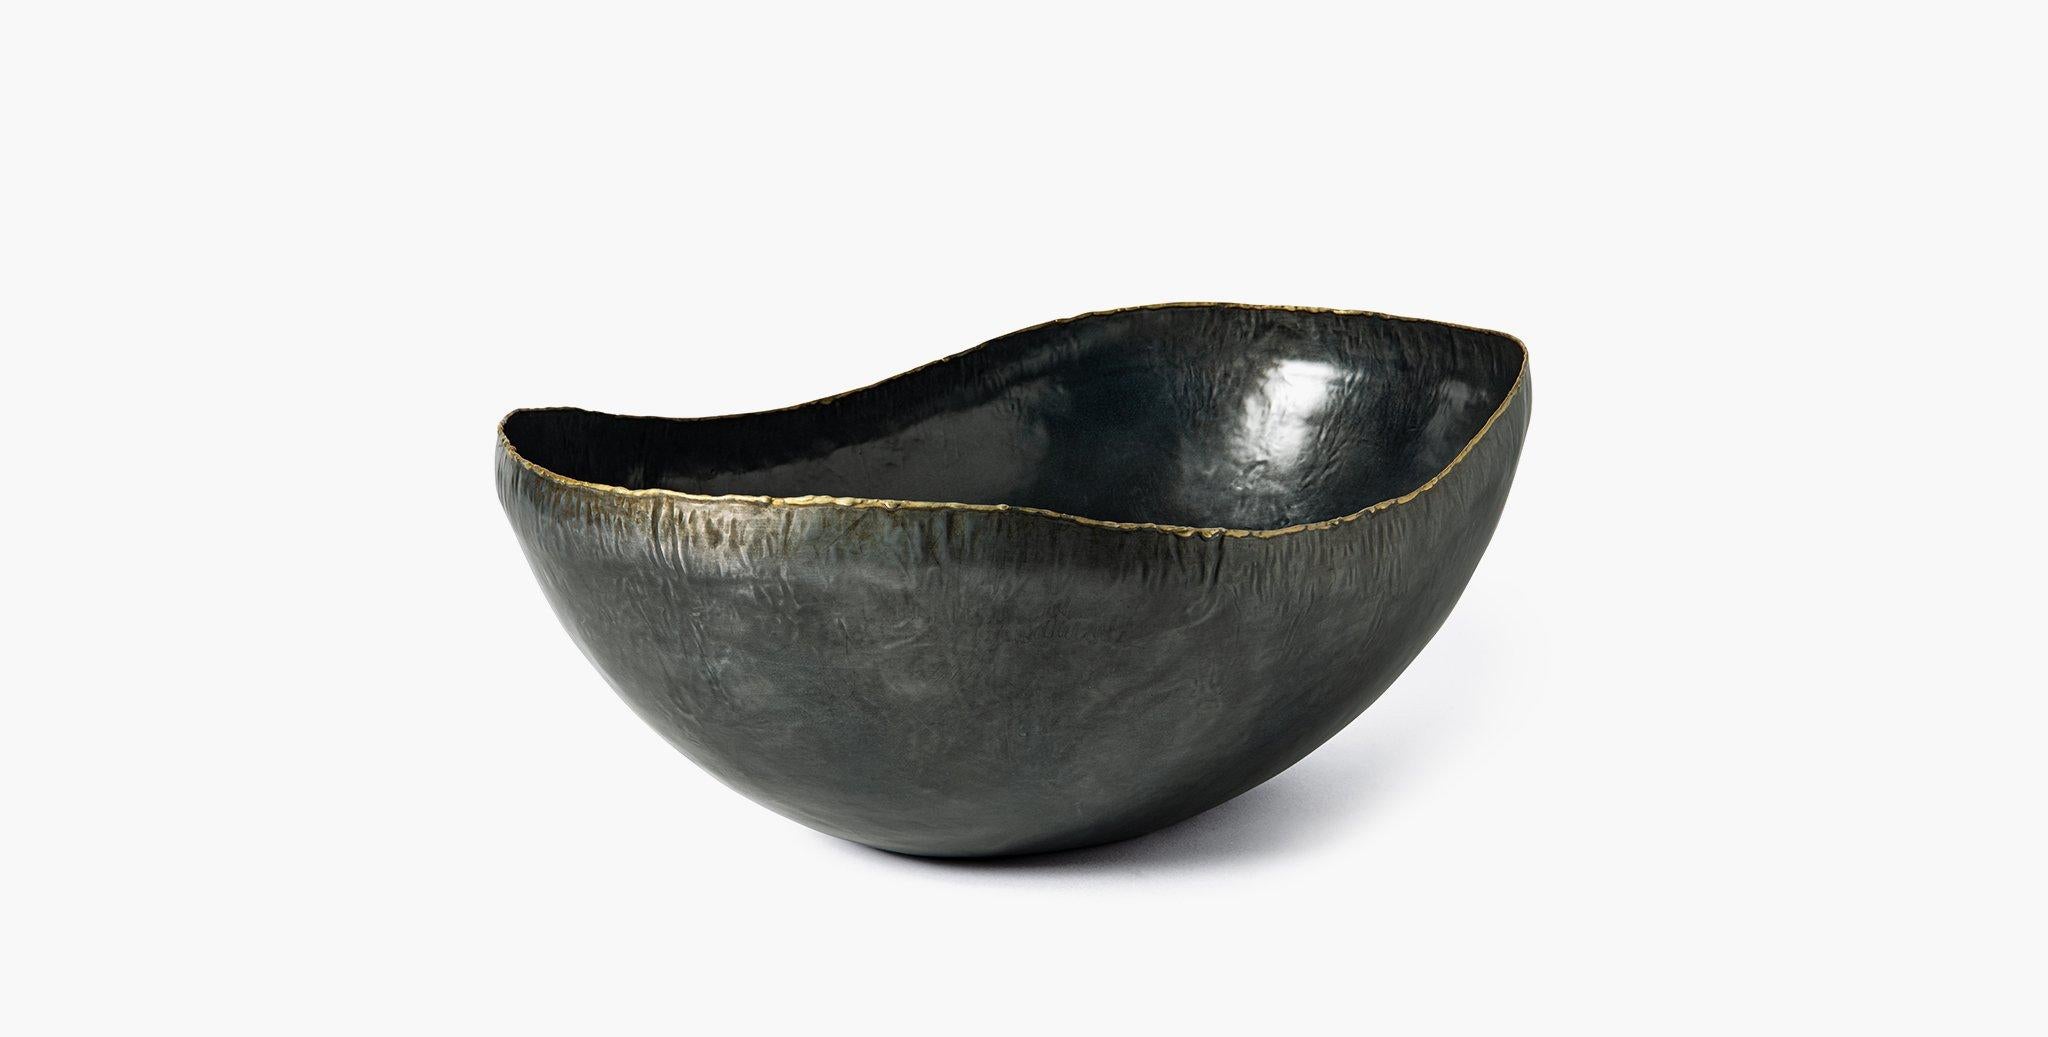 Our Vernon Bowls feature organic curves in ebonized iron with subtle metal detailing to highlight its serpentine edge. Our handcrafted fabrics, leathers, and finishes are inspired by the natural variations within fibers, textures, and weaves. Each